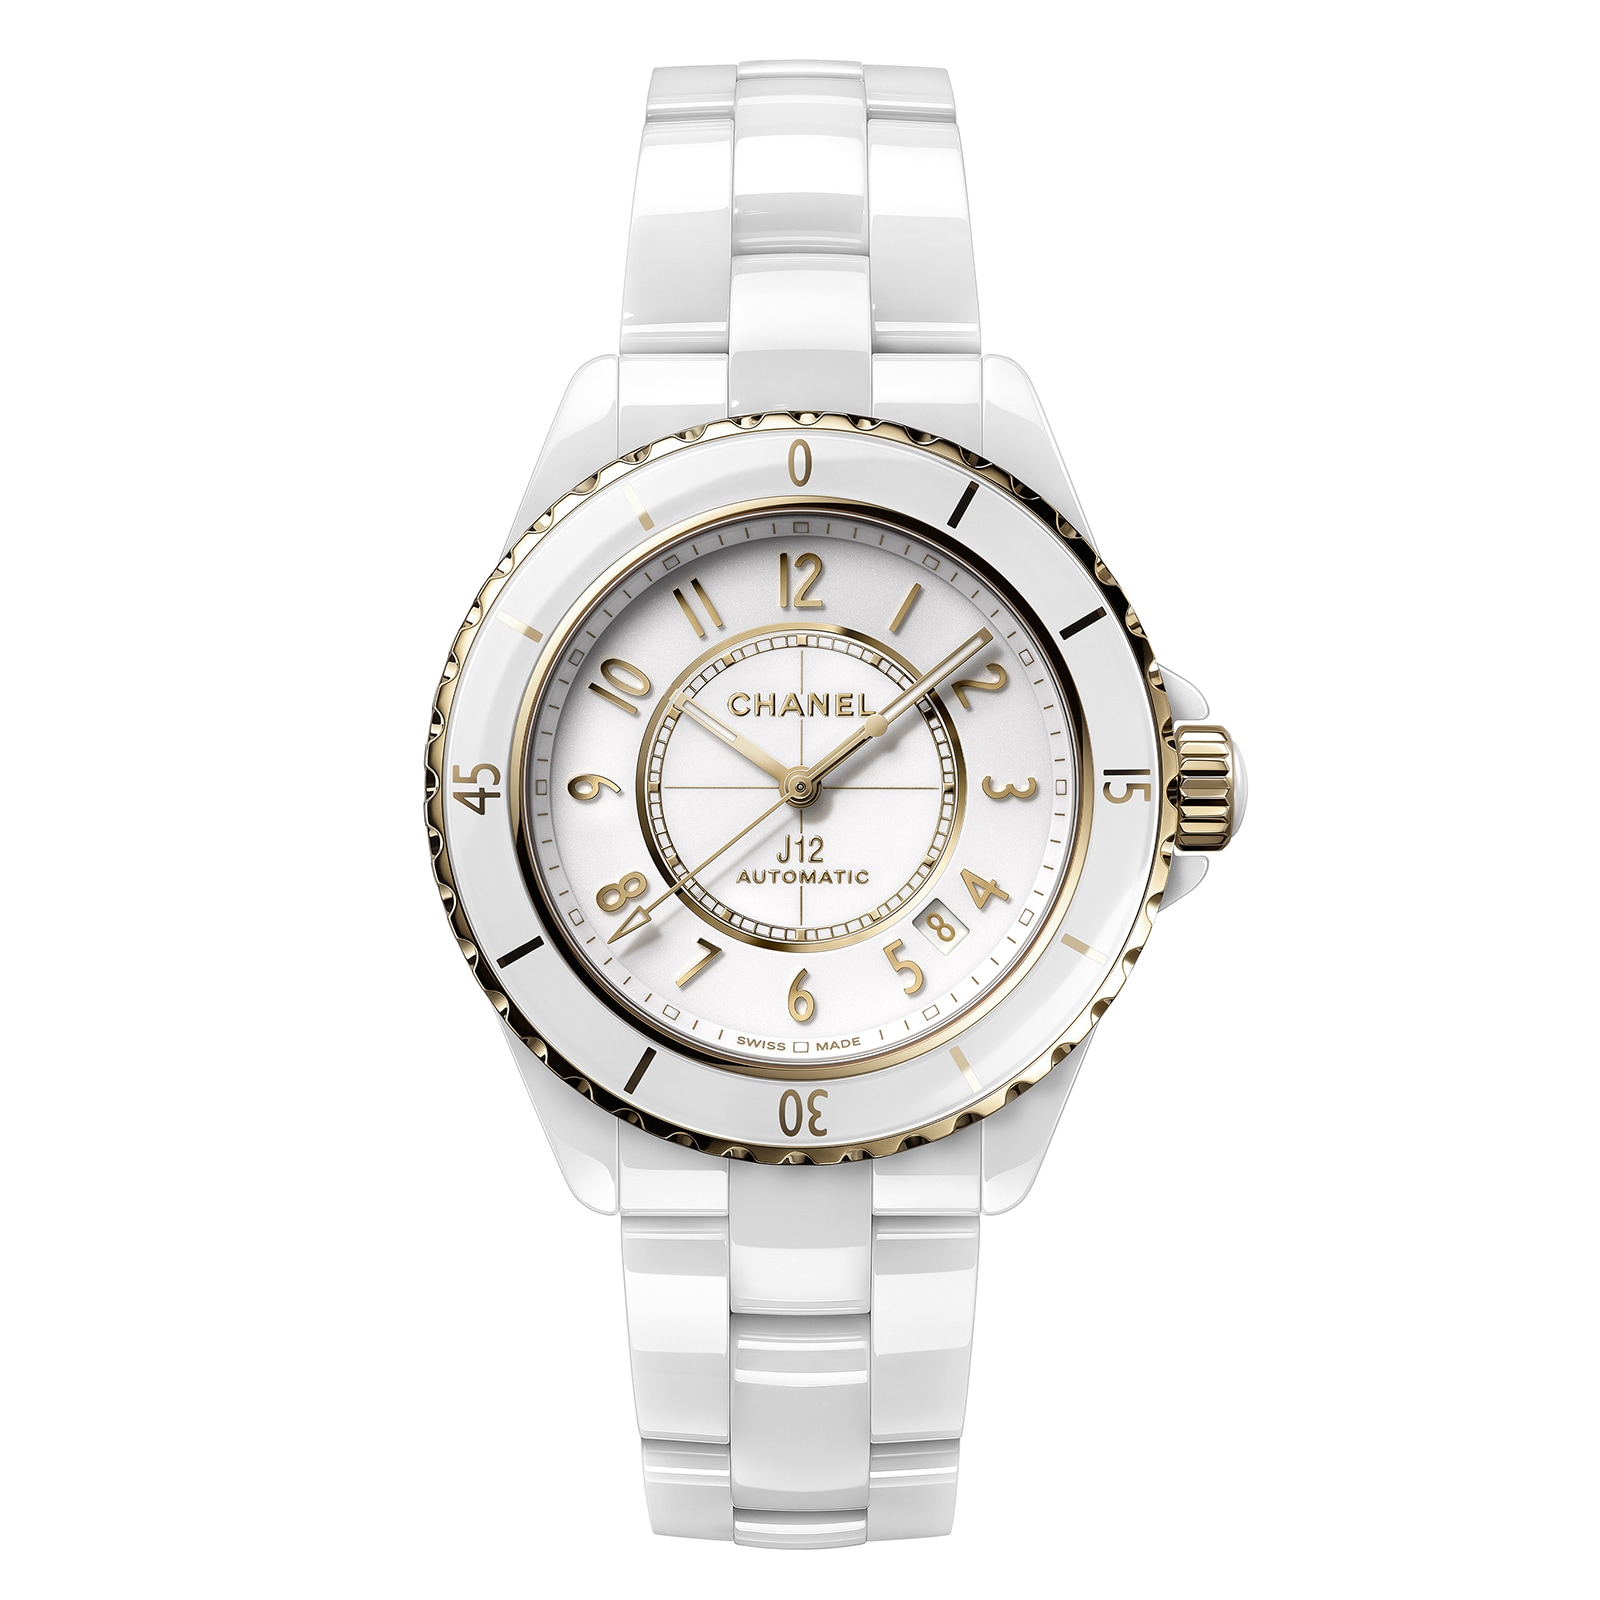 Chanel Premiere L Wrist Watch Watch Wrist Watch H0001 Quartz... for  Rs.154,678 for sale from a Trusted Seller on Chrono24